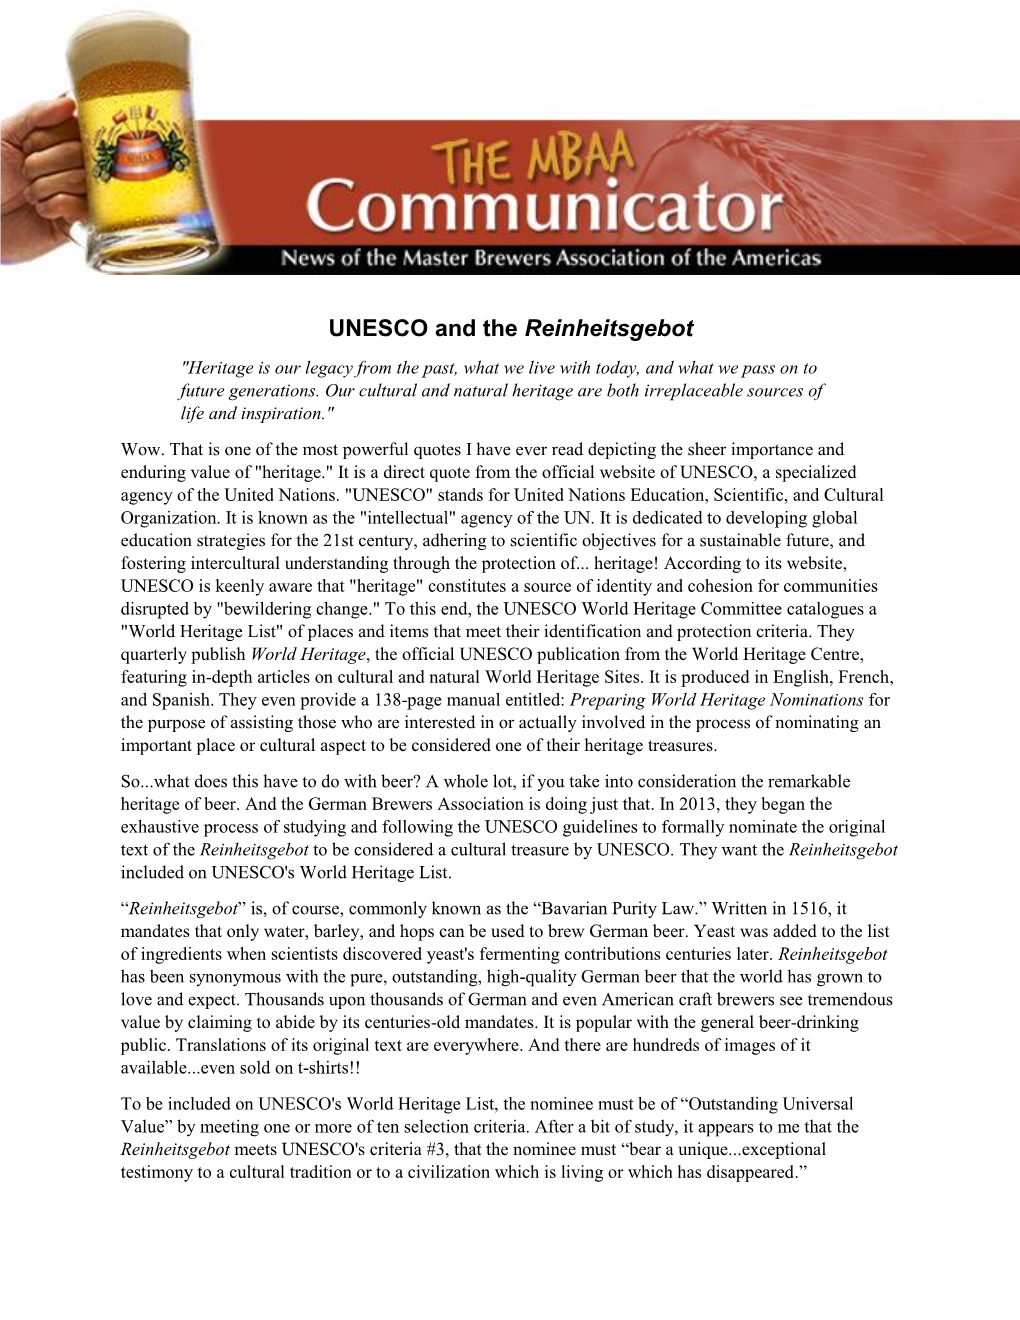 UNESCO and the Reinheitsgebot "Heritage Is Our Legacy from the Past, What We Live with Today, and What We Pass on to Future Generations